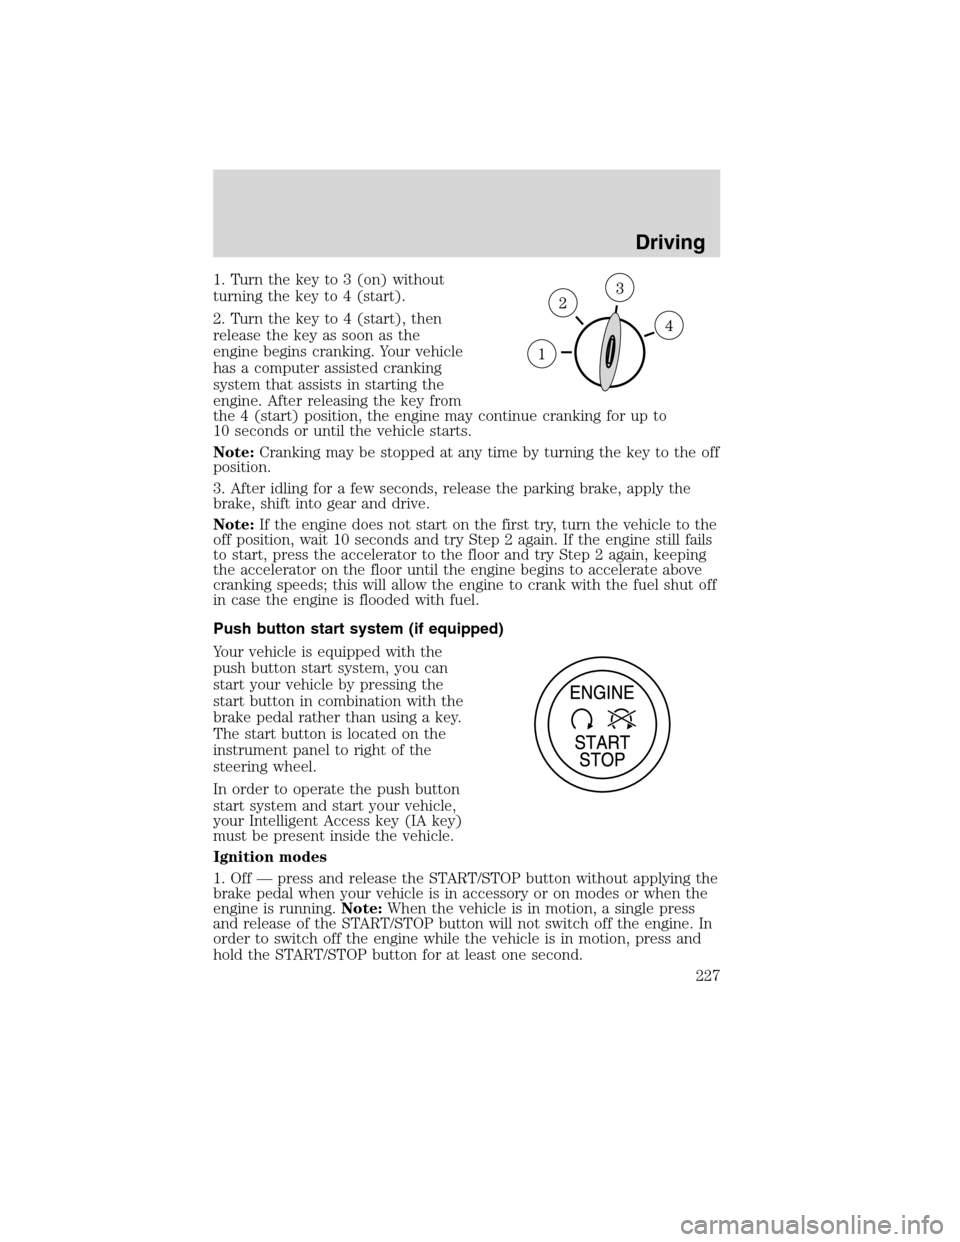 LINCOLN MKS 2010  Owners Manual 1. Turn the key to 3 (on) without
turning the key to 4 (start).
2. Turn the key to 4 (start), then
release the key as soon as the
engine begins cranking. Your vehicle
has a computer assisted cranking
